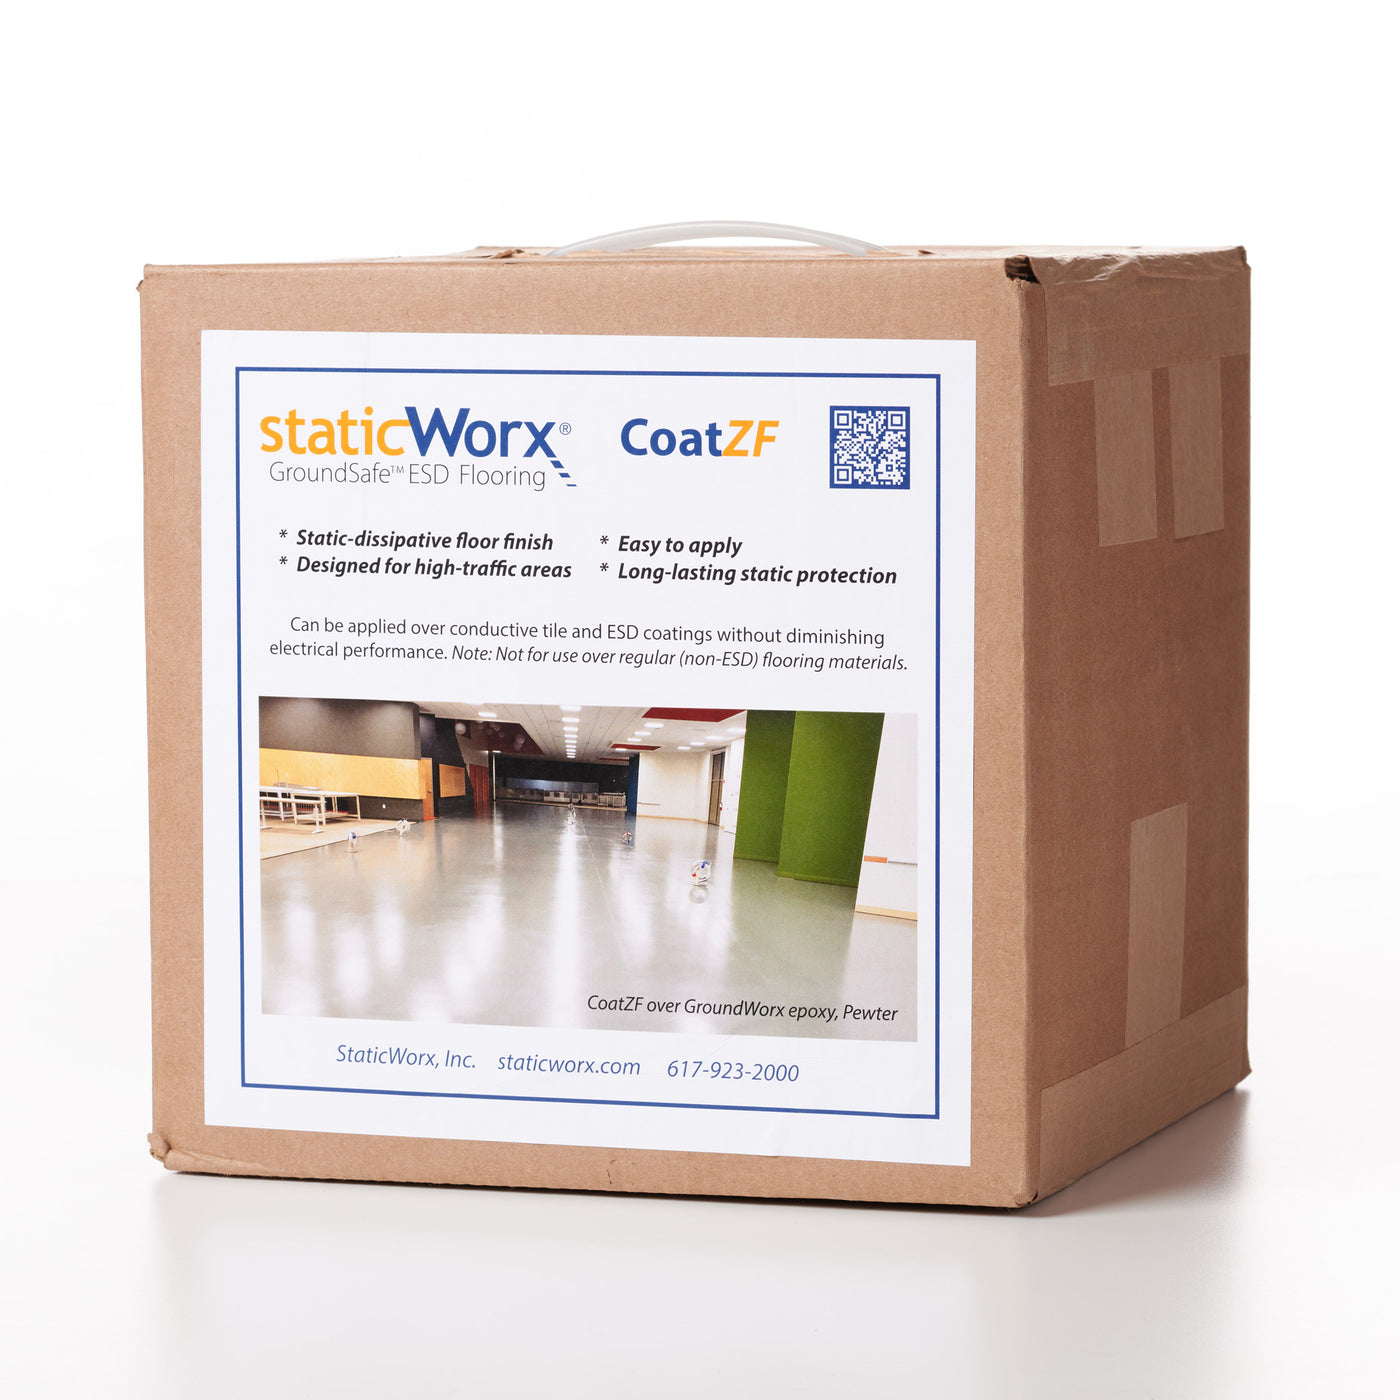 Photo of a box of StaticWorx CoatZF static-dissipative floor finish. The box is brown with a white label on it with some product information and a picture of an installed ESD epoxy floor. The product information reads: 'Static-dissipative floor finish. Designed for high traffic areas. Easy to apply. Long-lasting static protection. Can be applied over conductive tile and ESD coatings without diminishing electrical performance. Note: Not for use over regular (non-ESD) flooring materials.'